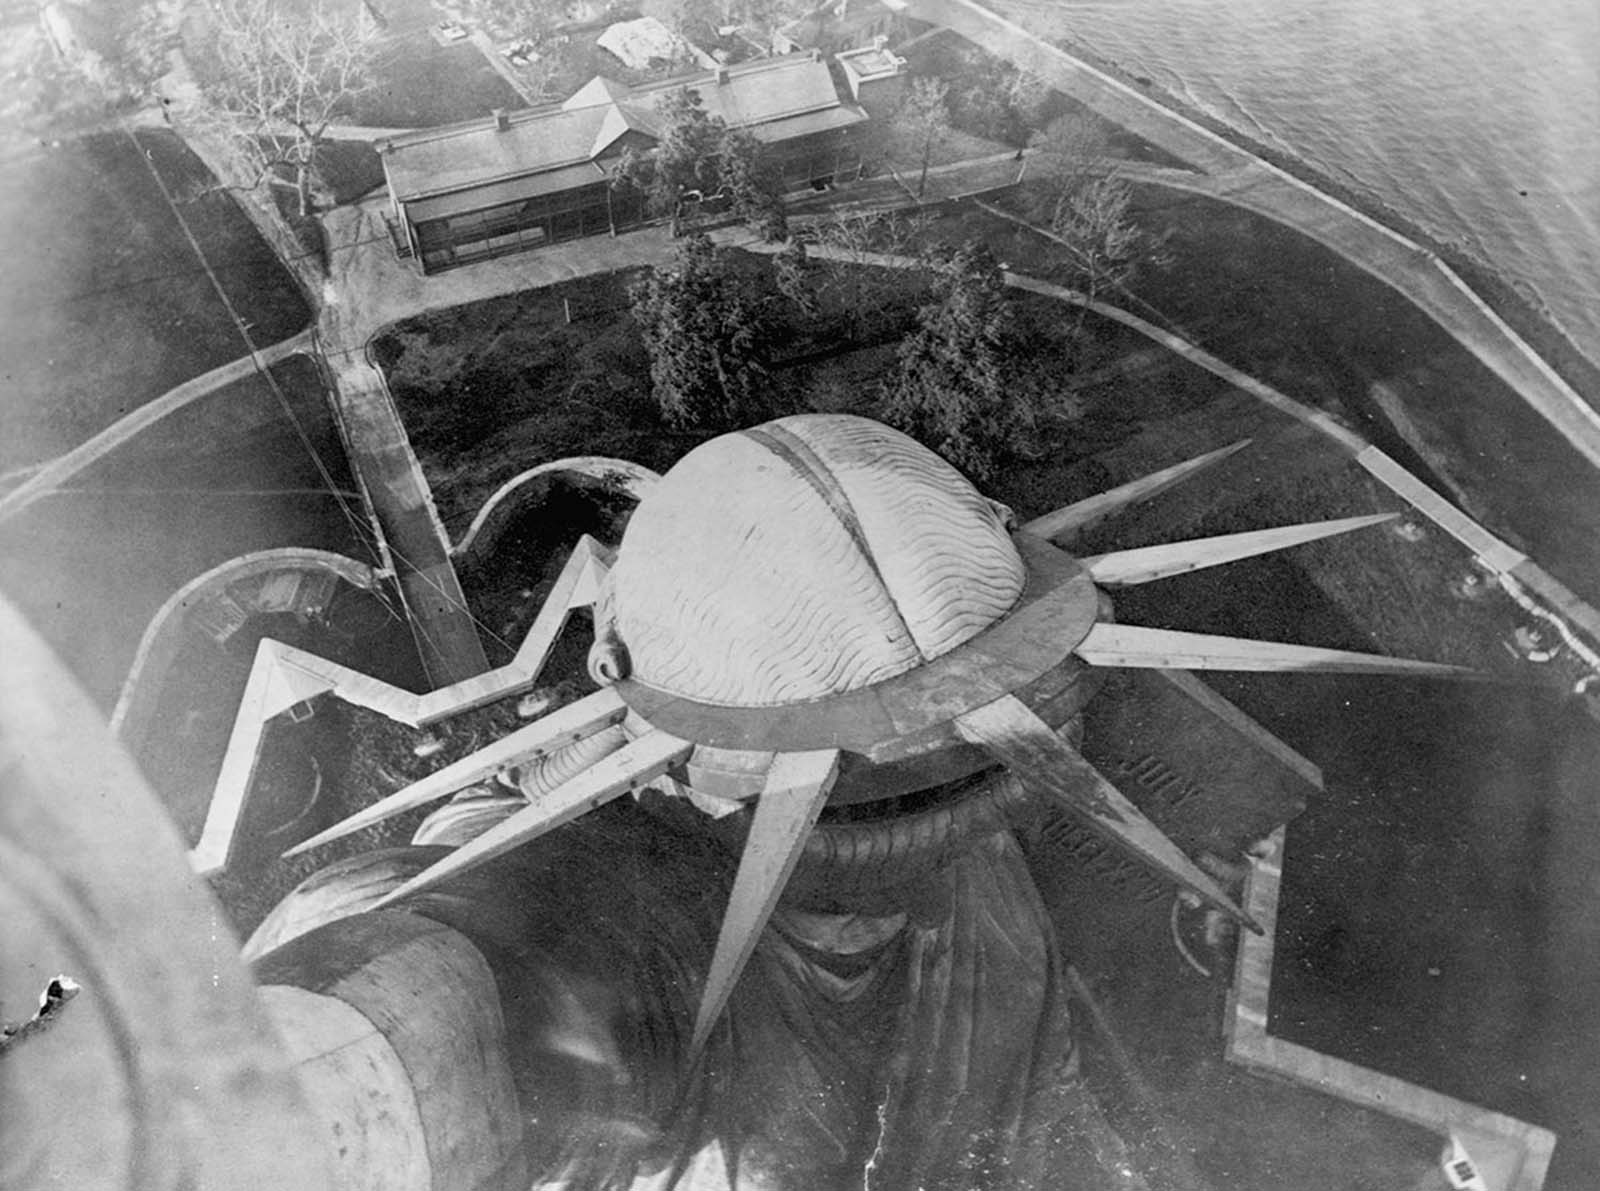 Looking down at the statue from its torch, circa 1890.